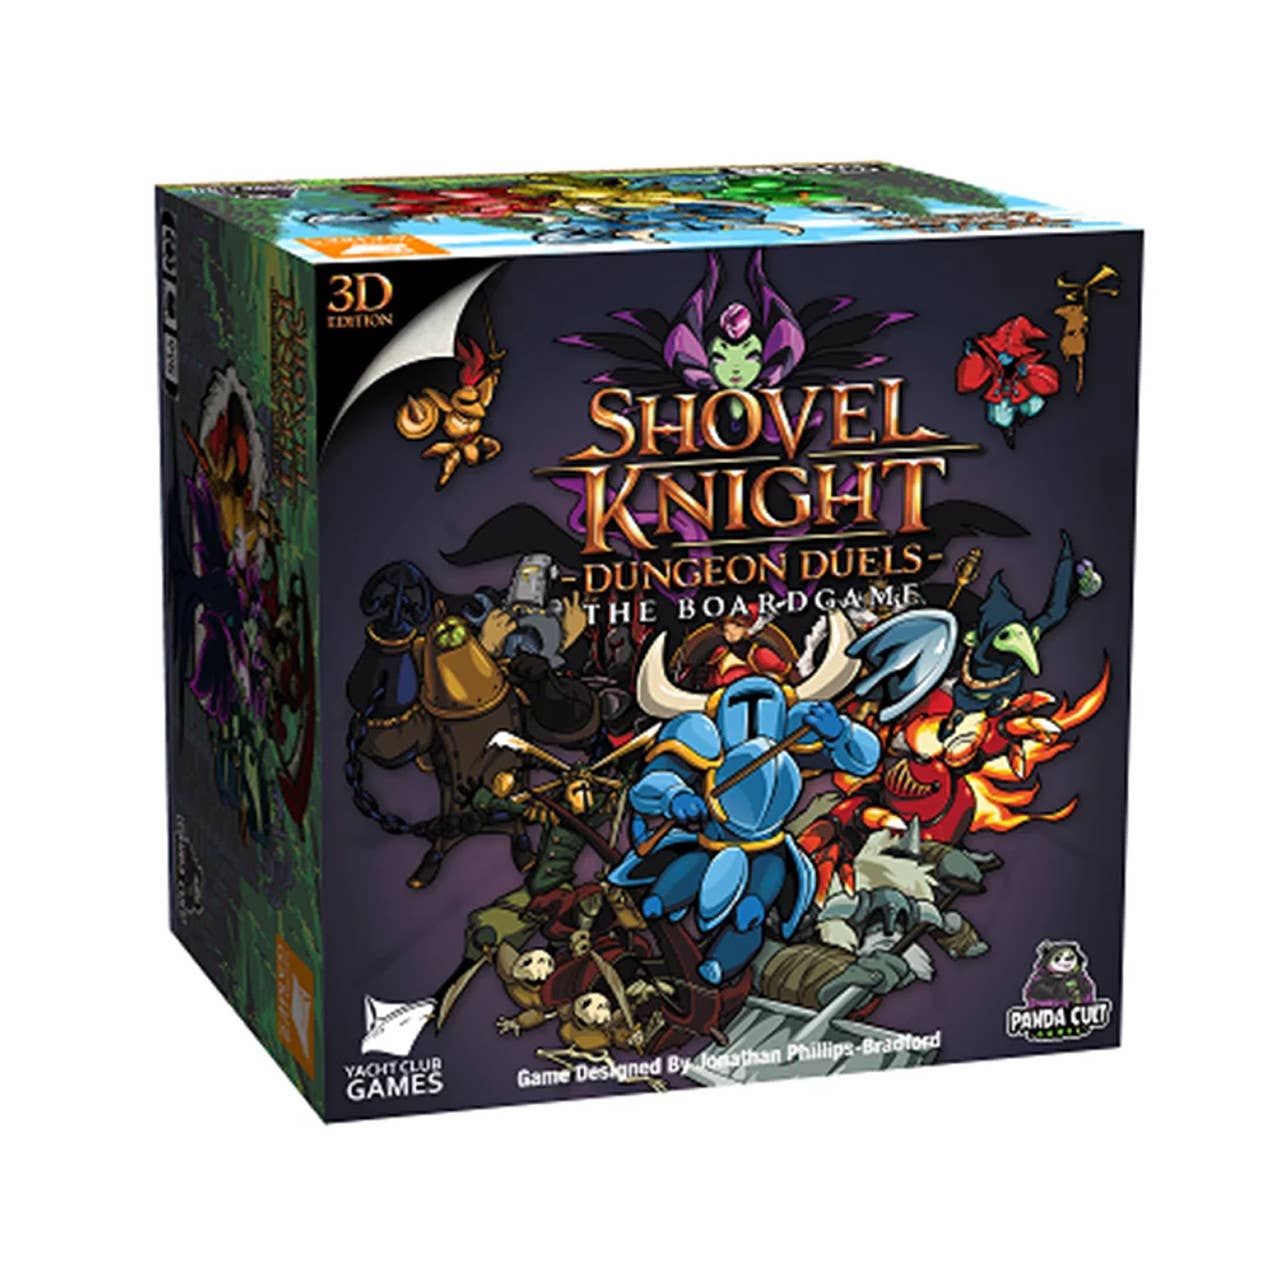 Shovel Knight: Dungeon Duels 3D Edition - Bards & Cards